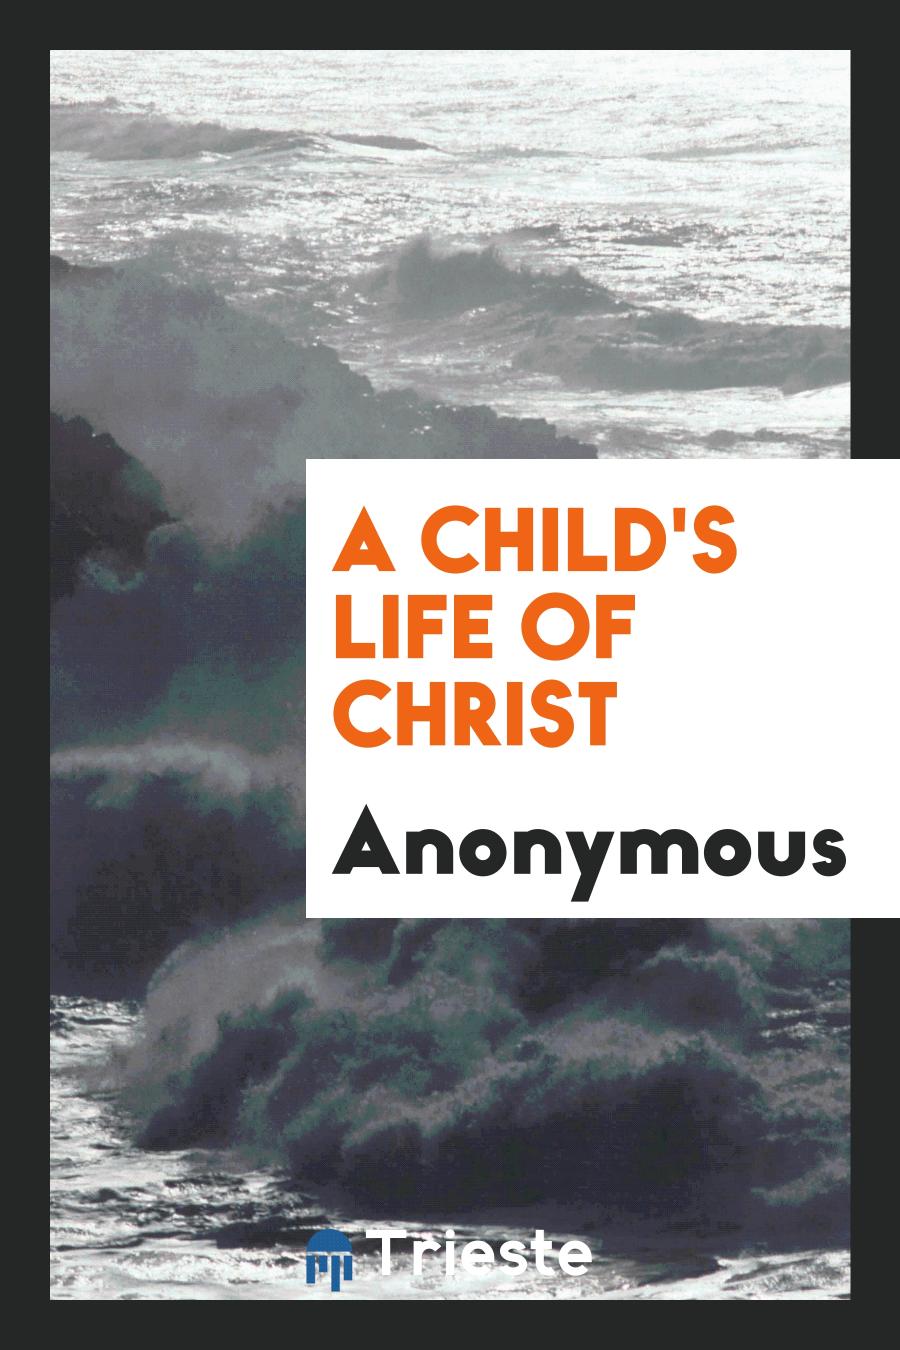 A Child's Life of Christ